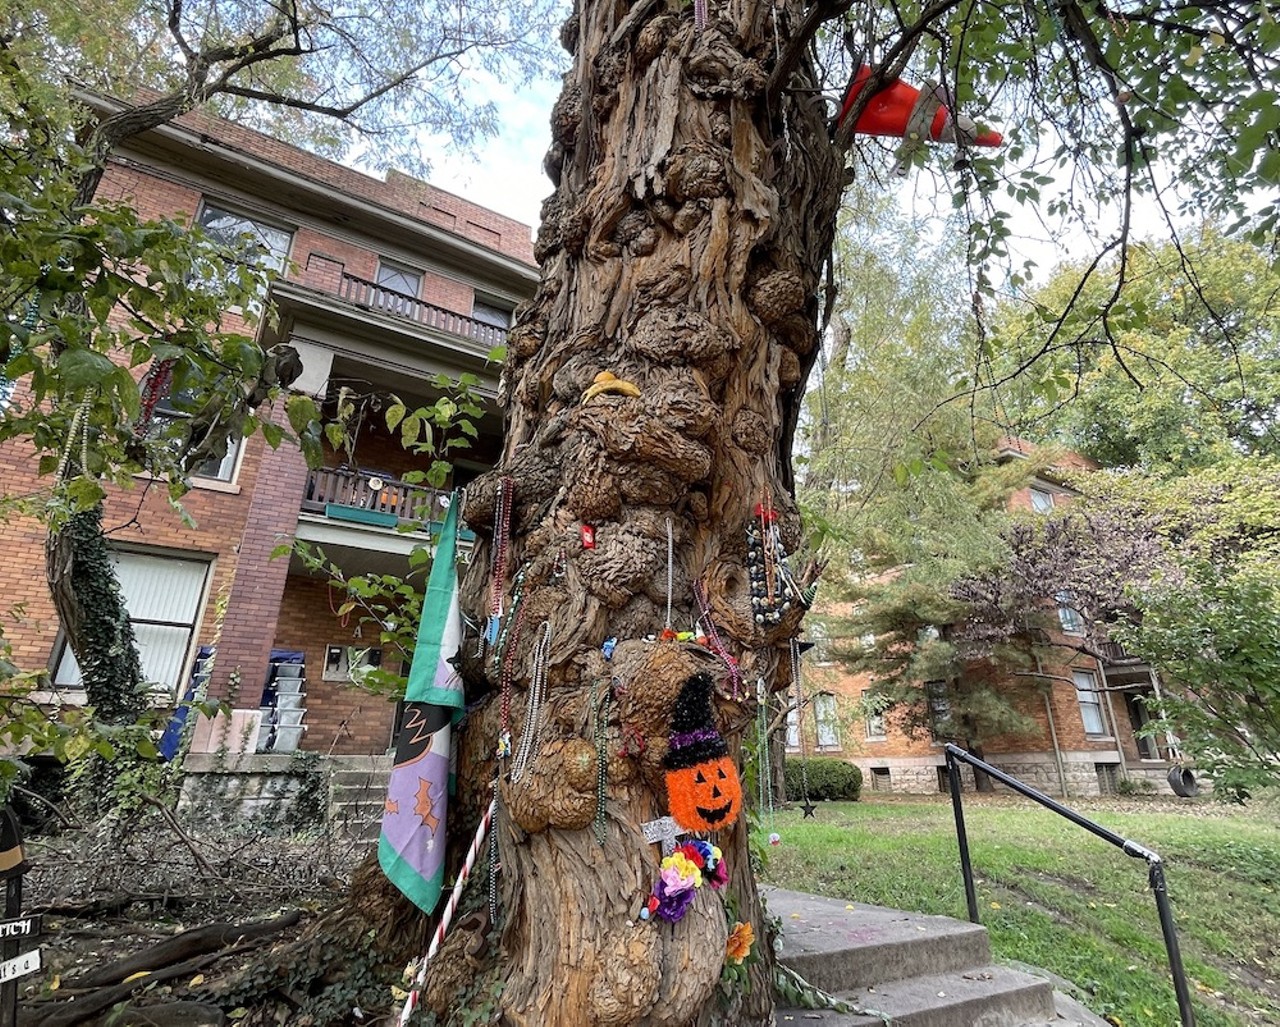 The Witches&#146; Tree
Park Avenue and South Sixth Street
Visitors place trinkets at this gnarled tree in the historic Old Louisville neighborhood. Legend has it that a coven of witches used to conduct rituals at the spot, where a straight maple tree once stood. When the city allegedly cut down the tree to make way for a May Pole in 1889, the witches cursed the city. Legend says on March 27, 1890, a tornado ripped through Louisville and a bolt of lightning electrified the old tree&#146;s stump &#151; and the Witches&#146; Tree grew out of it.   
Photo courtesy of David Domine